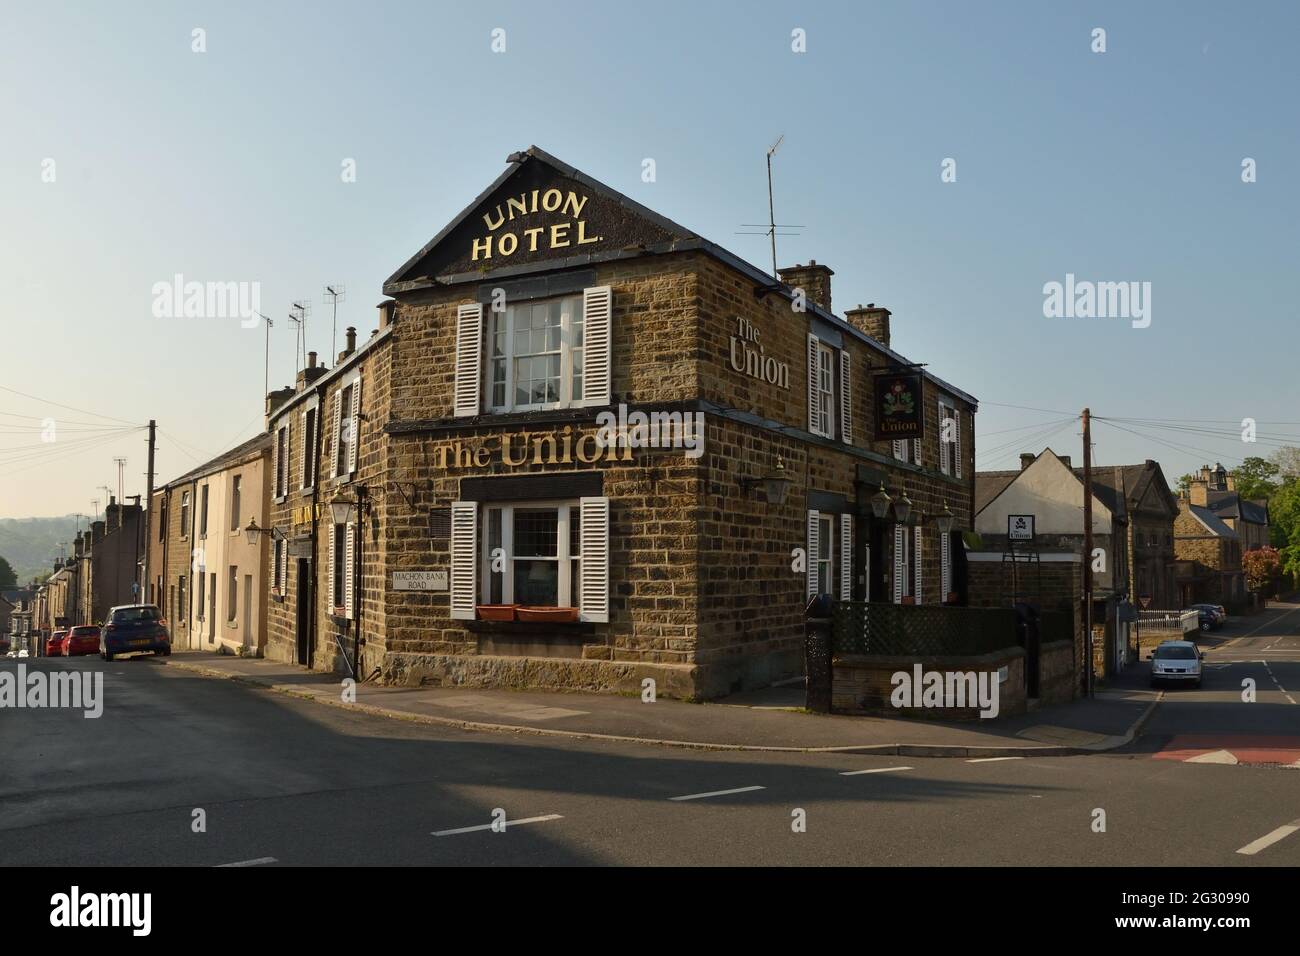 The Union Hotel public house on Union Road in the suburb of Nether Edge, city of Sheffield, England, UK. Stock Photo